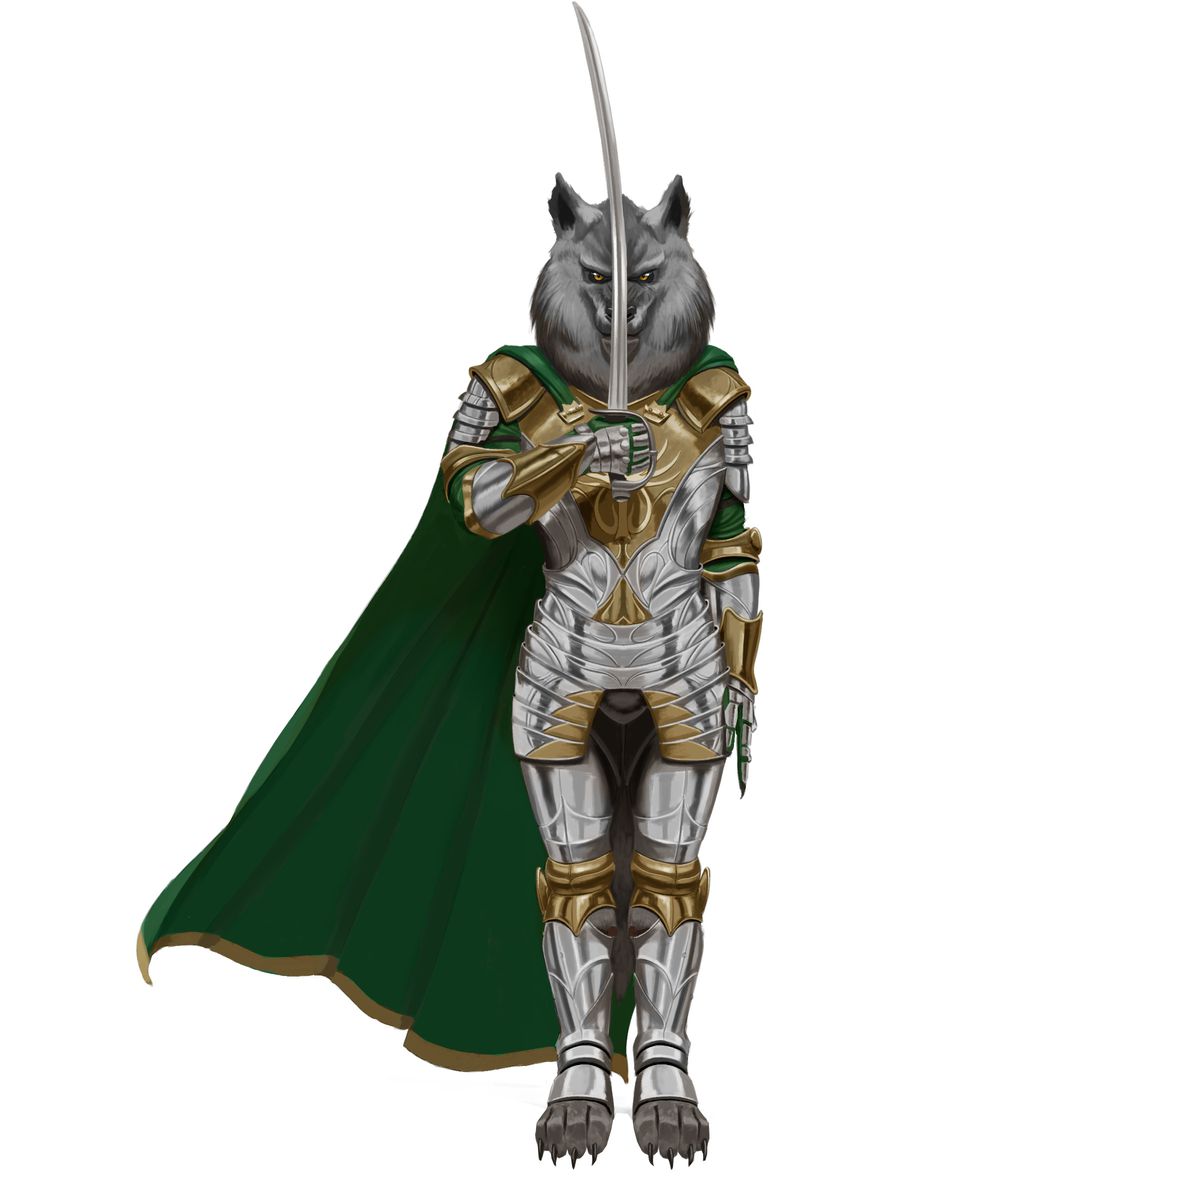 A werecreature in elaborage plate armor, its feet bare and a saber raised in salute. Its cape is green.